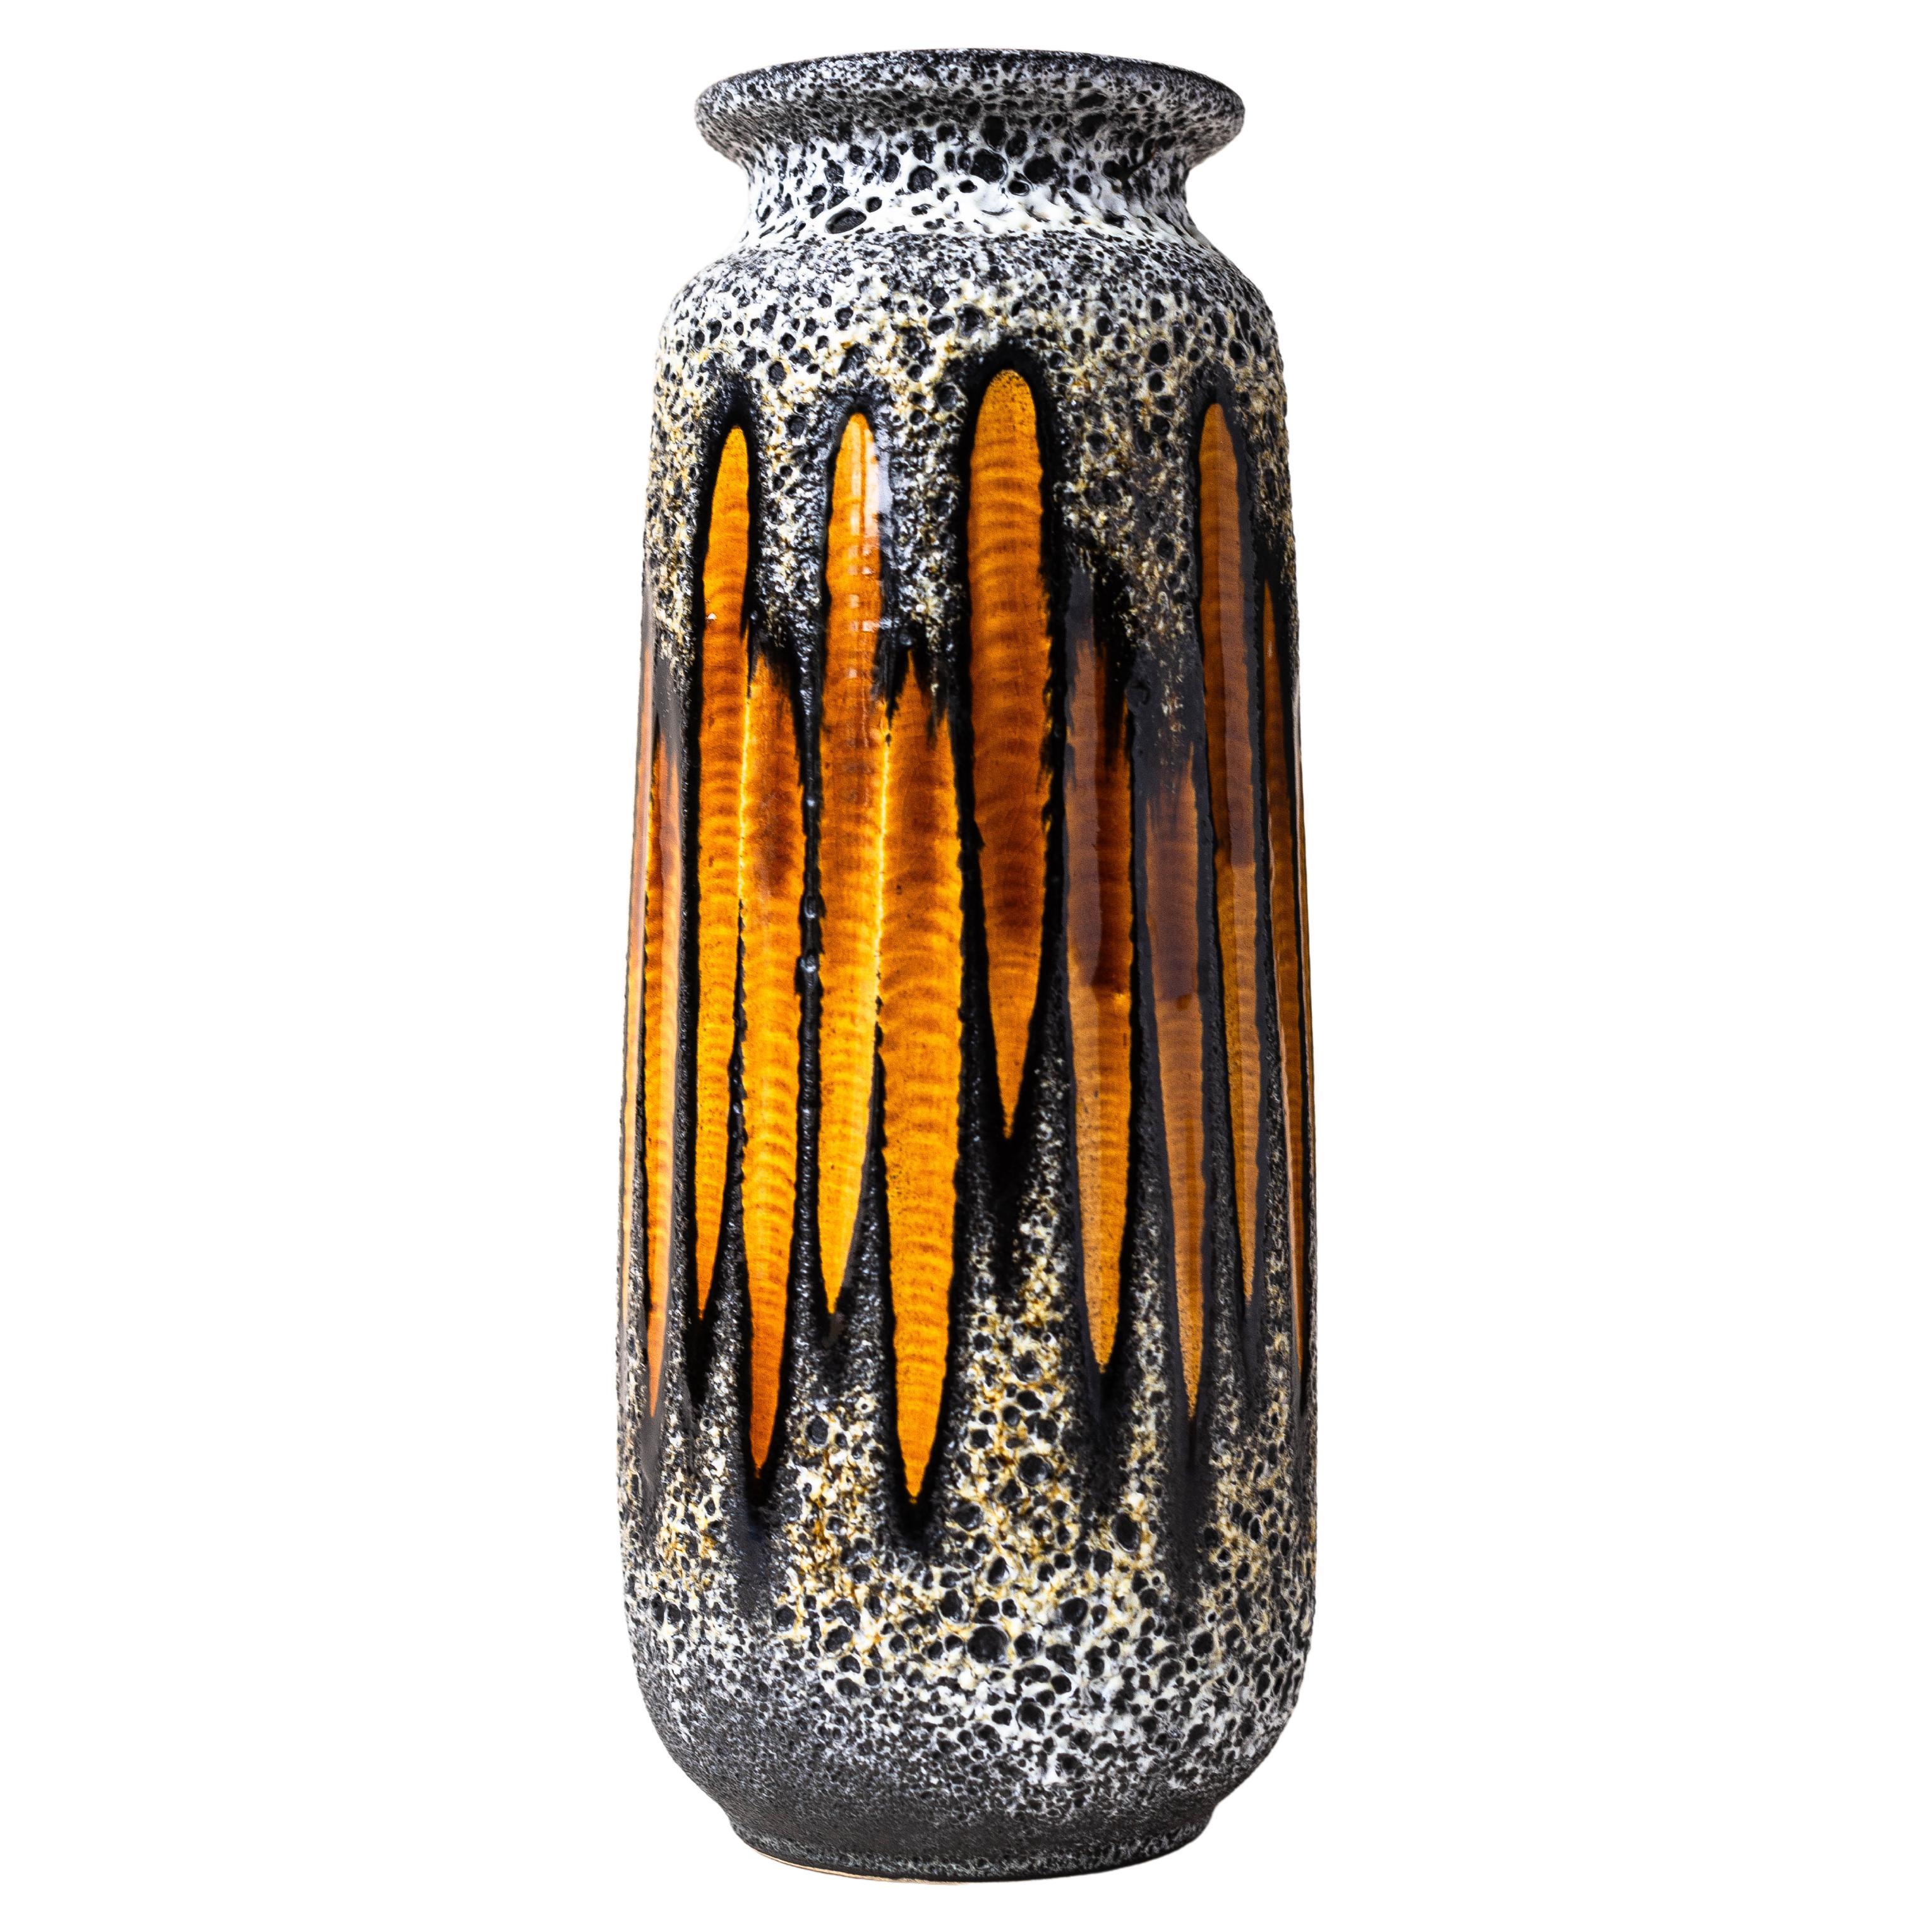 Lava Vases and Vessels